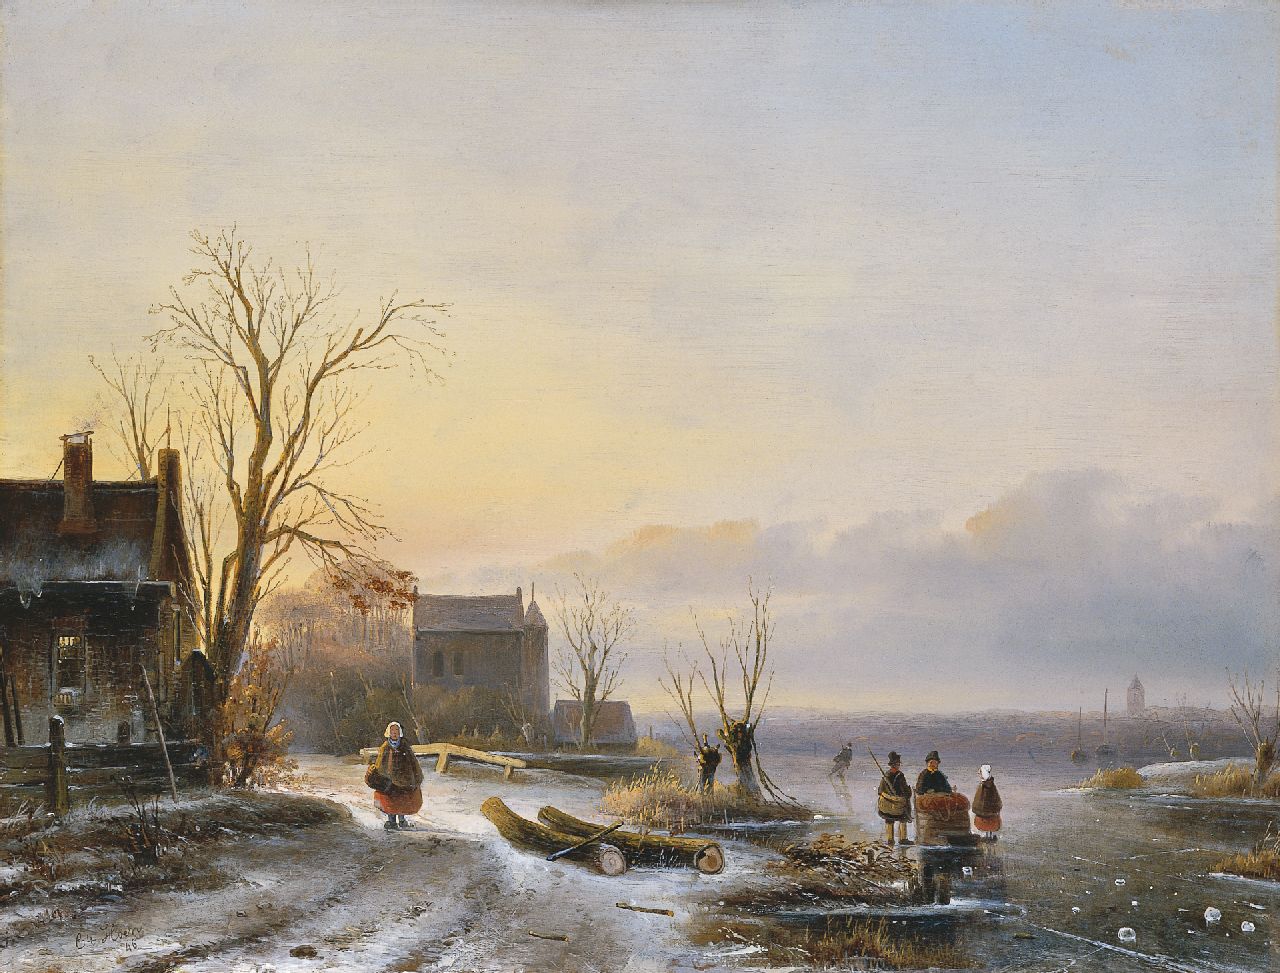 Hoen C.P. 't | Cornelis Petrus 't Hoen, Figures on the ice by sunset, oil on panel 41.3 x 54.2 cm, signed l.l. and dated '46